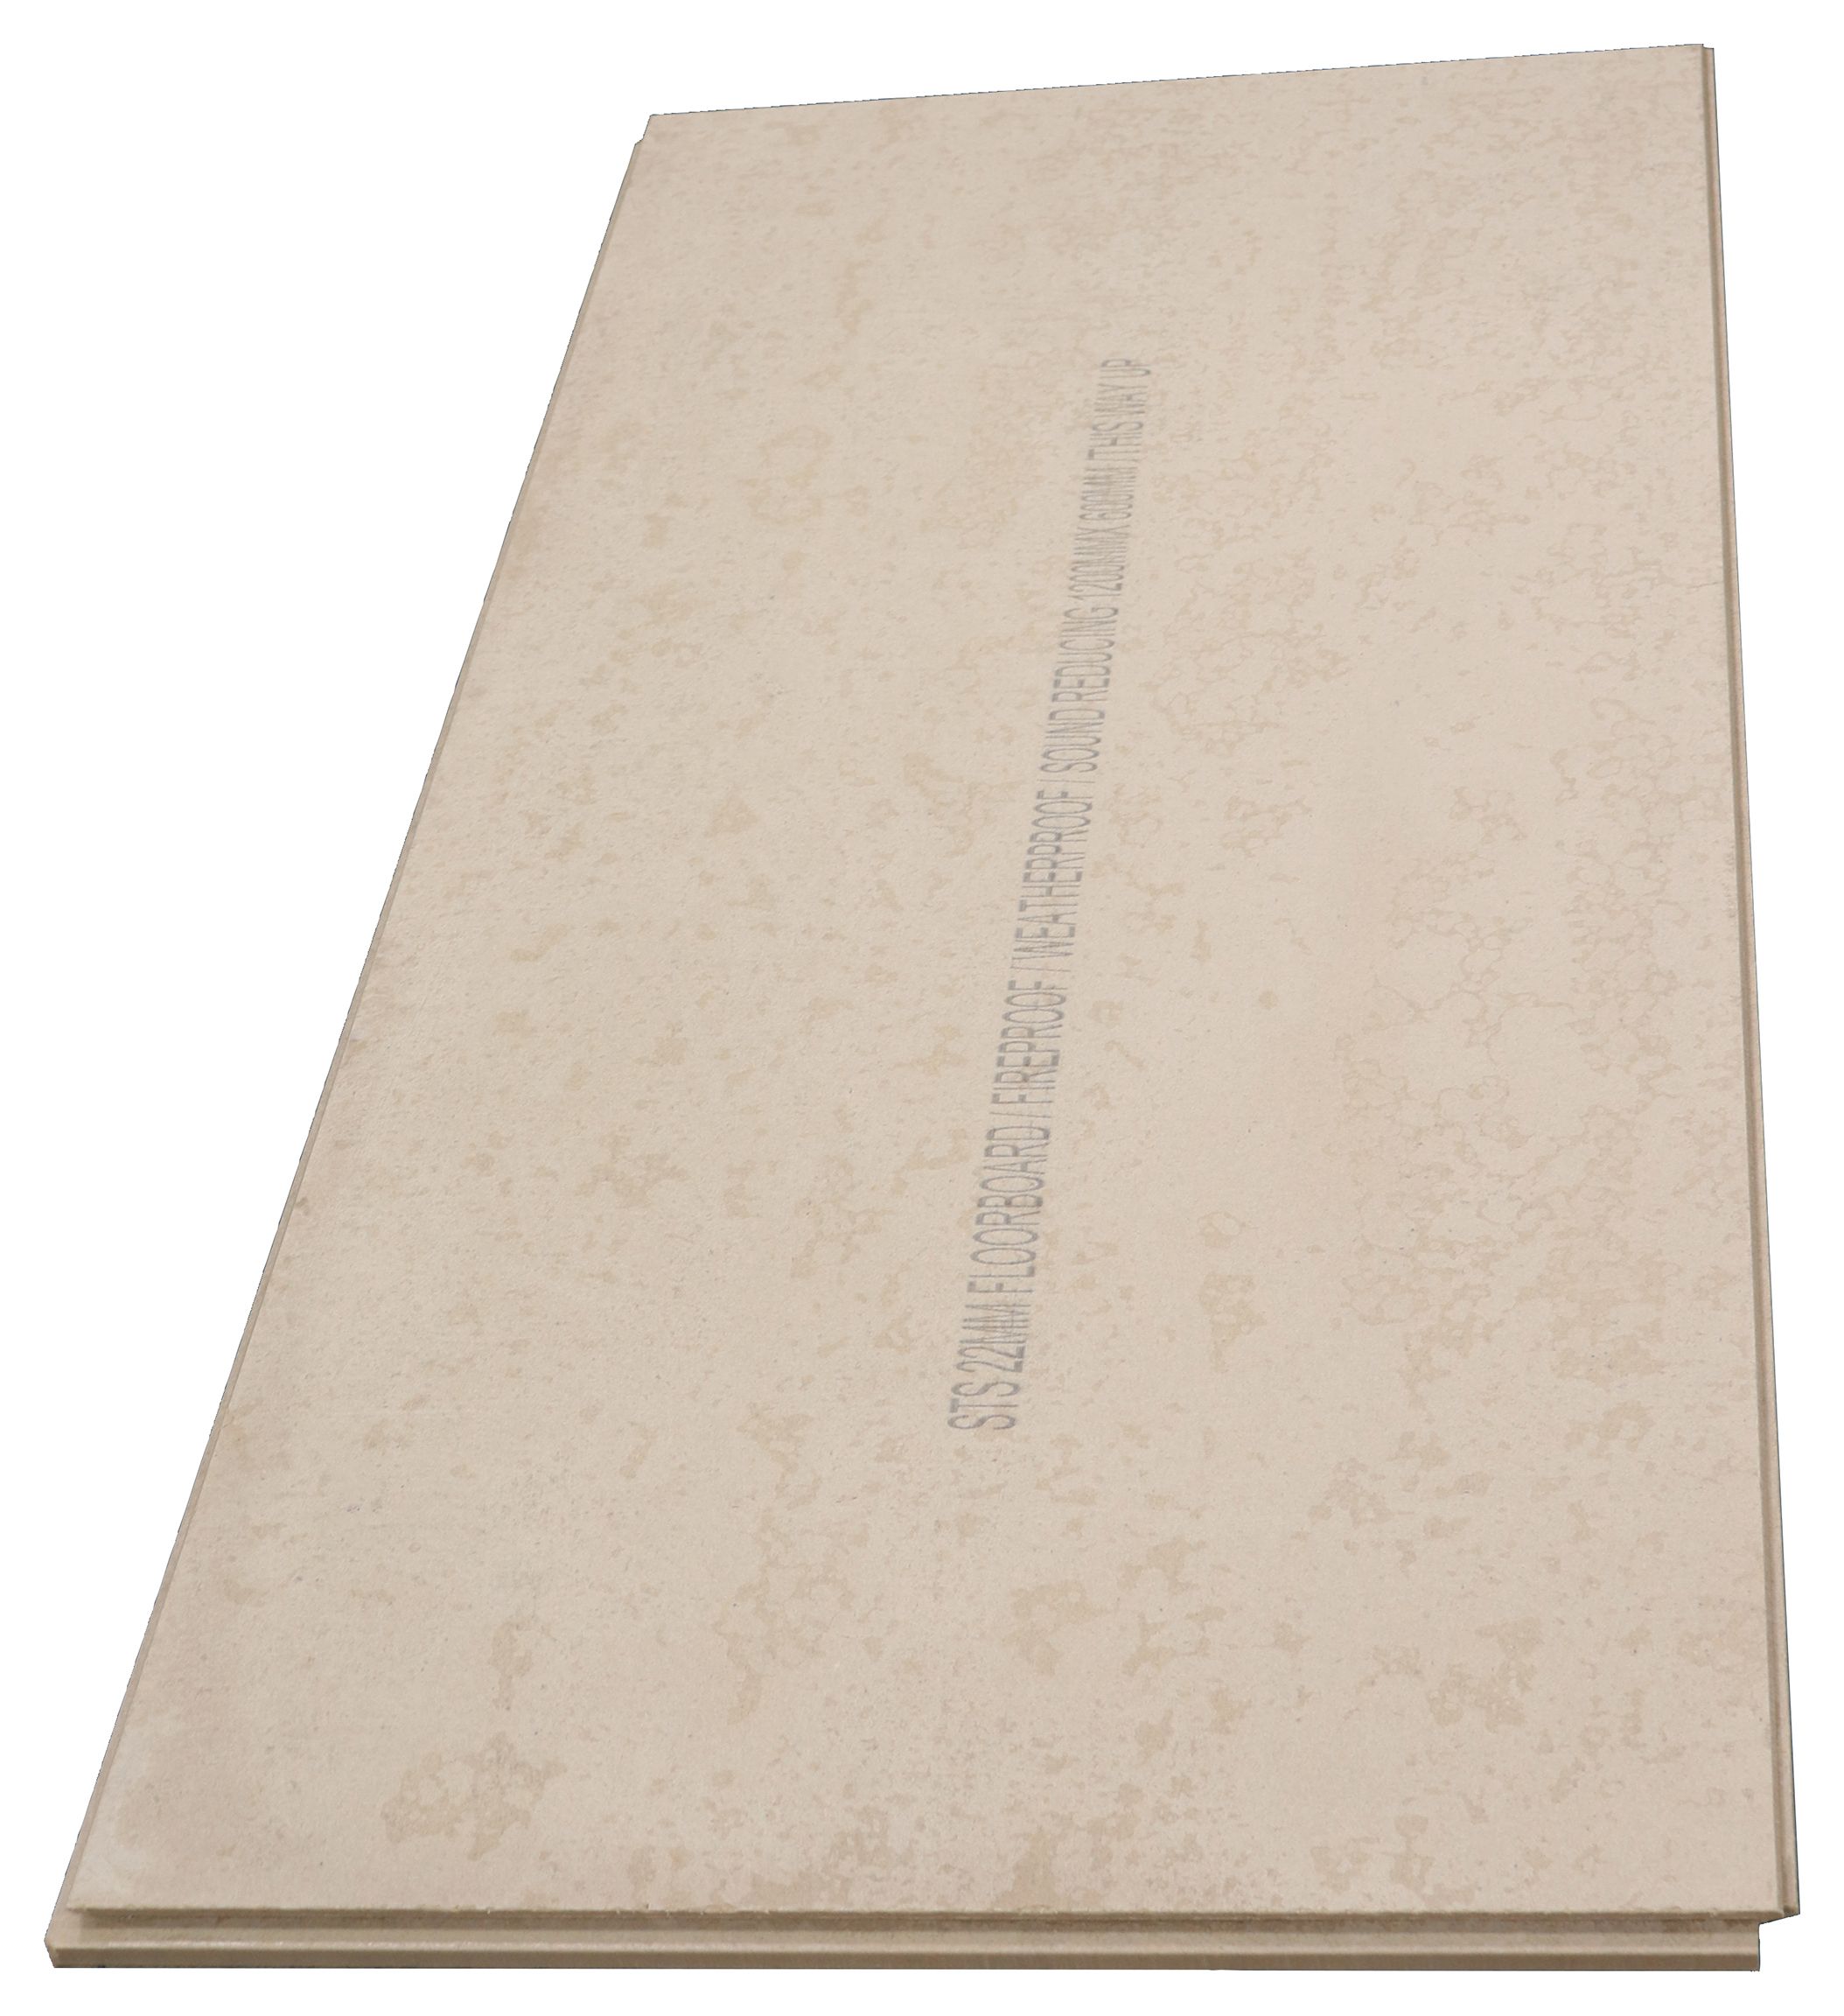 Image of STS NoMorePly TG4 Tile Backer Floor Board 1200 x 600 x 22mm - Pack of 40